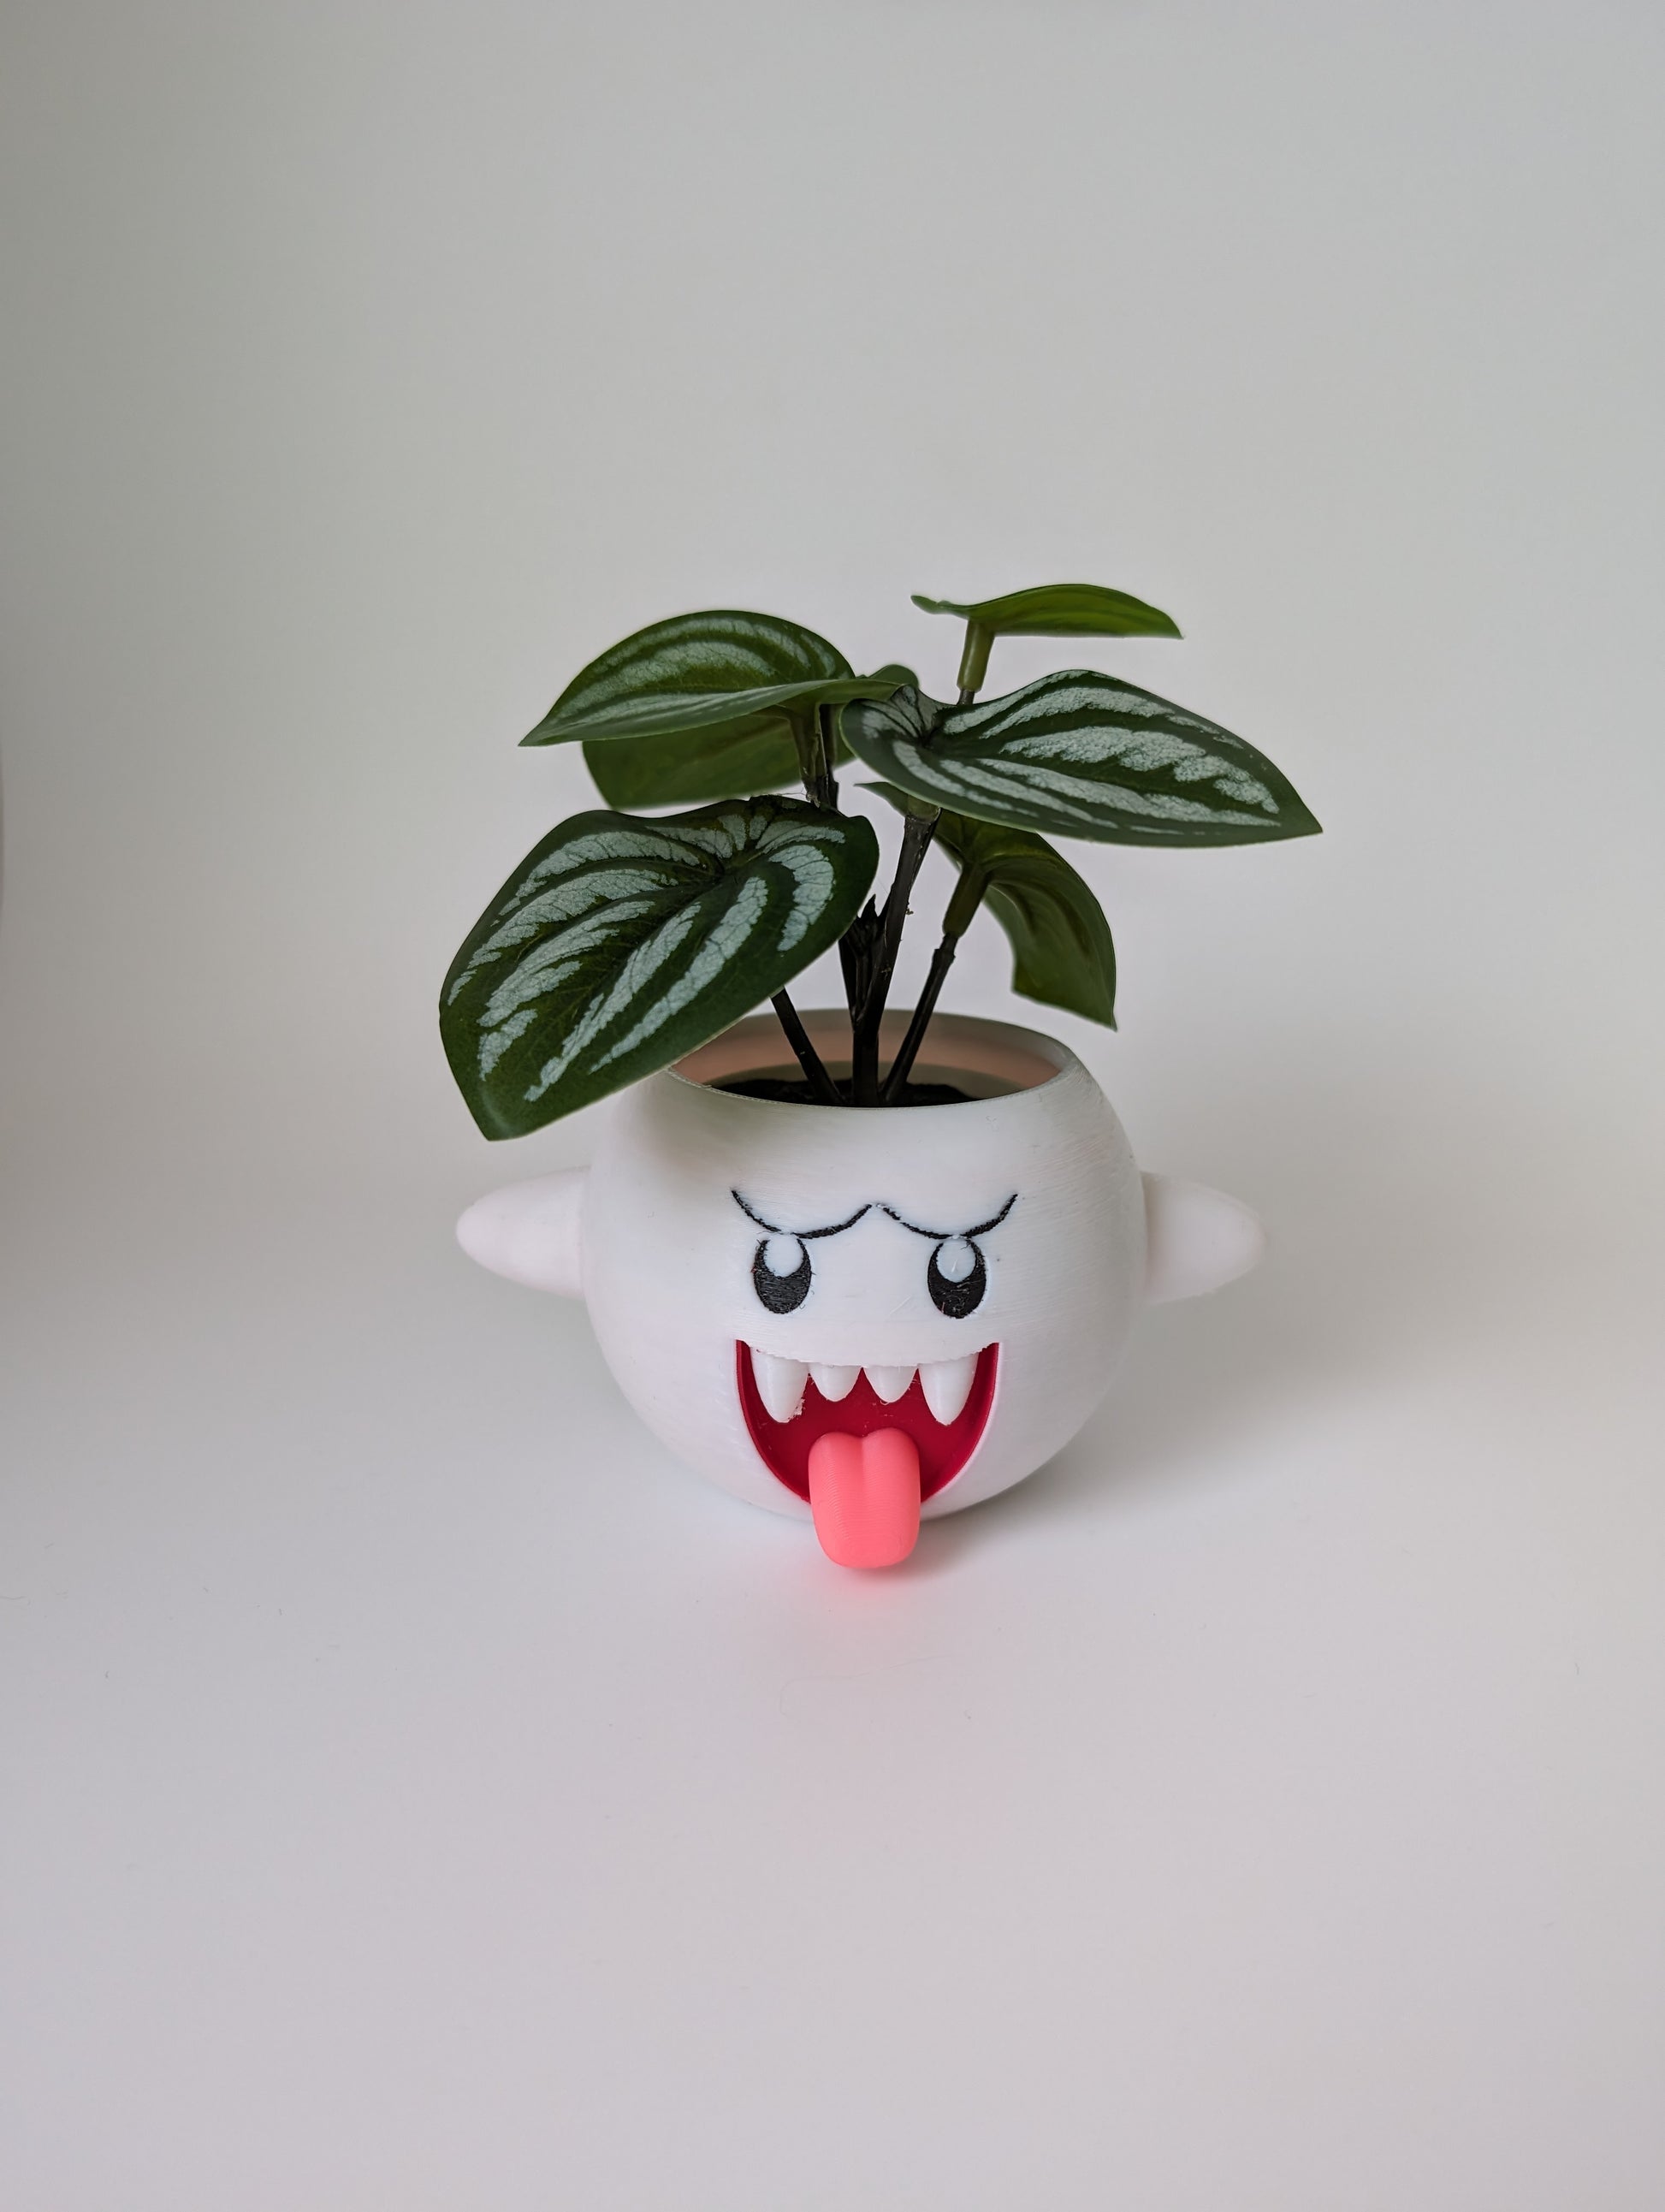 Small Mario Boo planter from the front